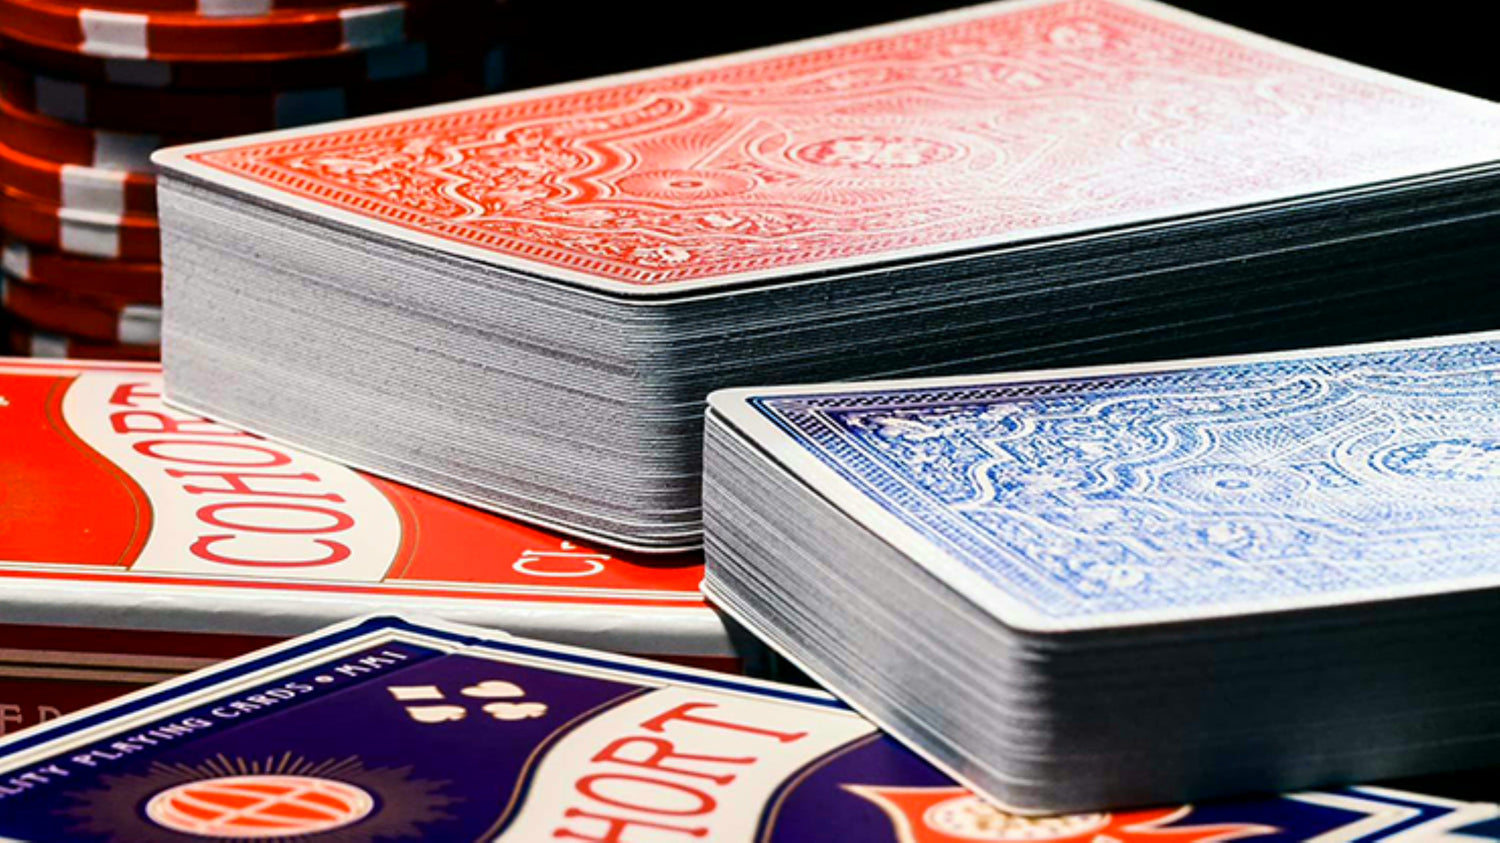 Blue Cohorts by Ellusionist : Marked Playing Cards , Poker , Magic , Cardistry , Singapore